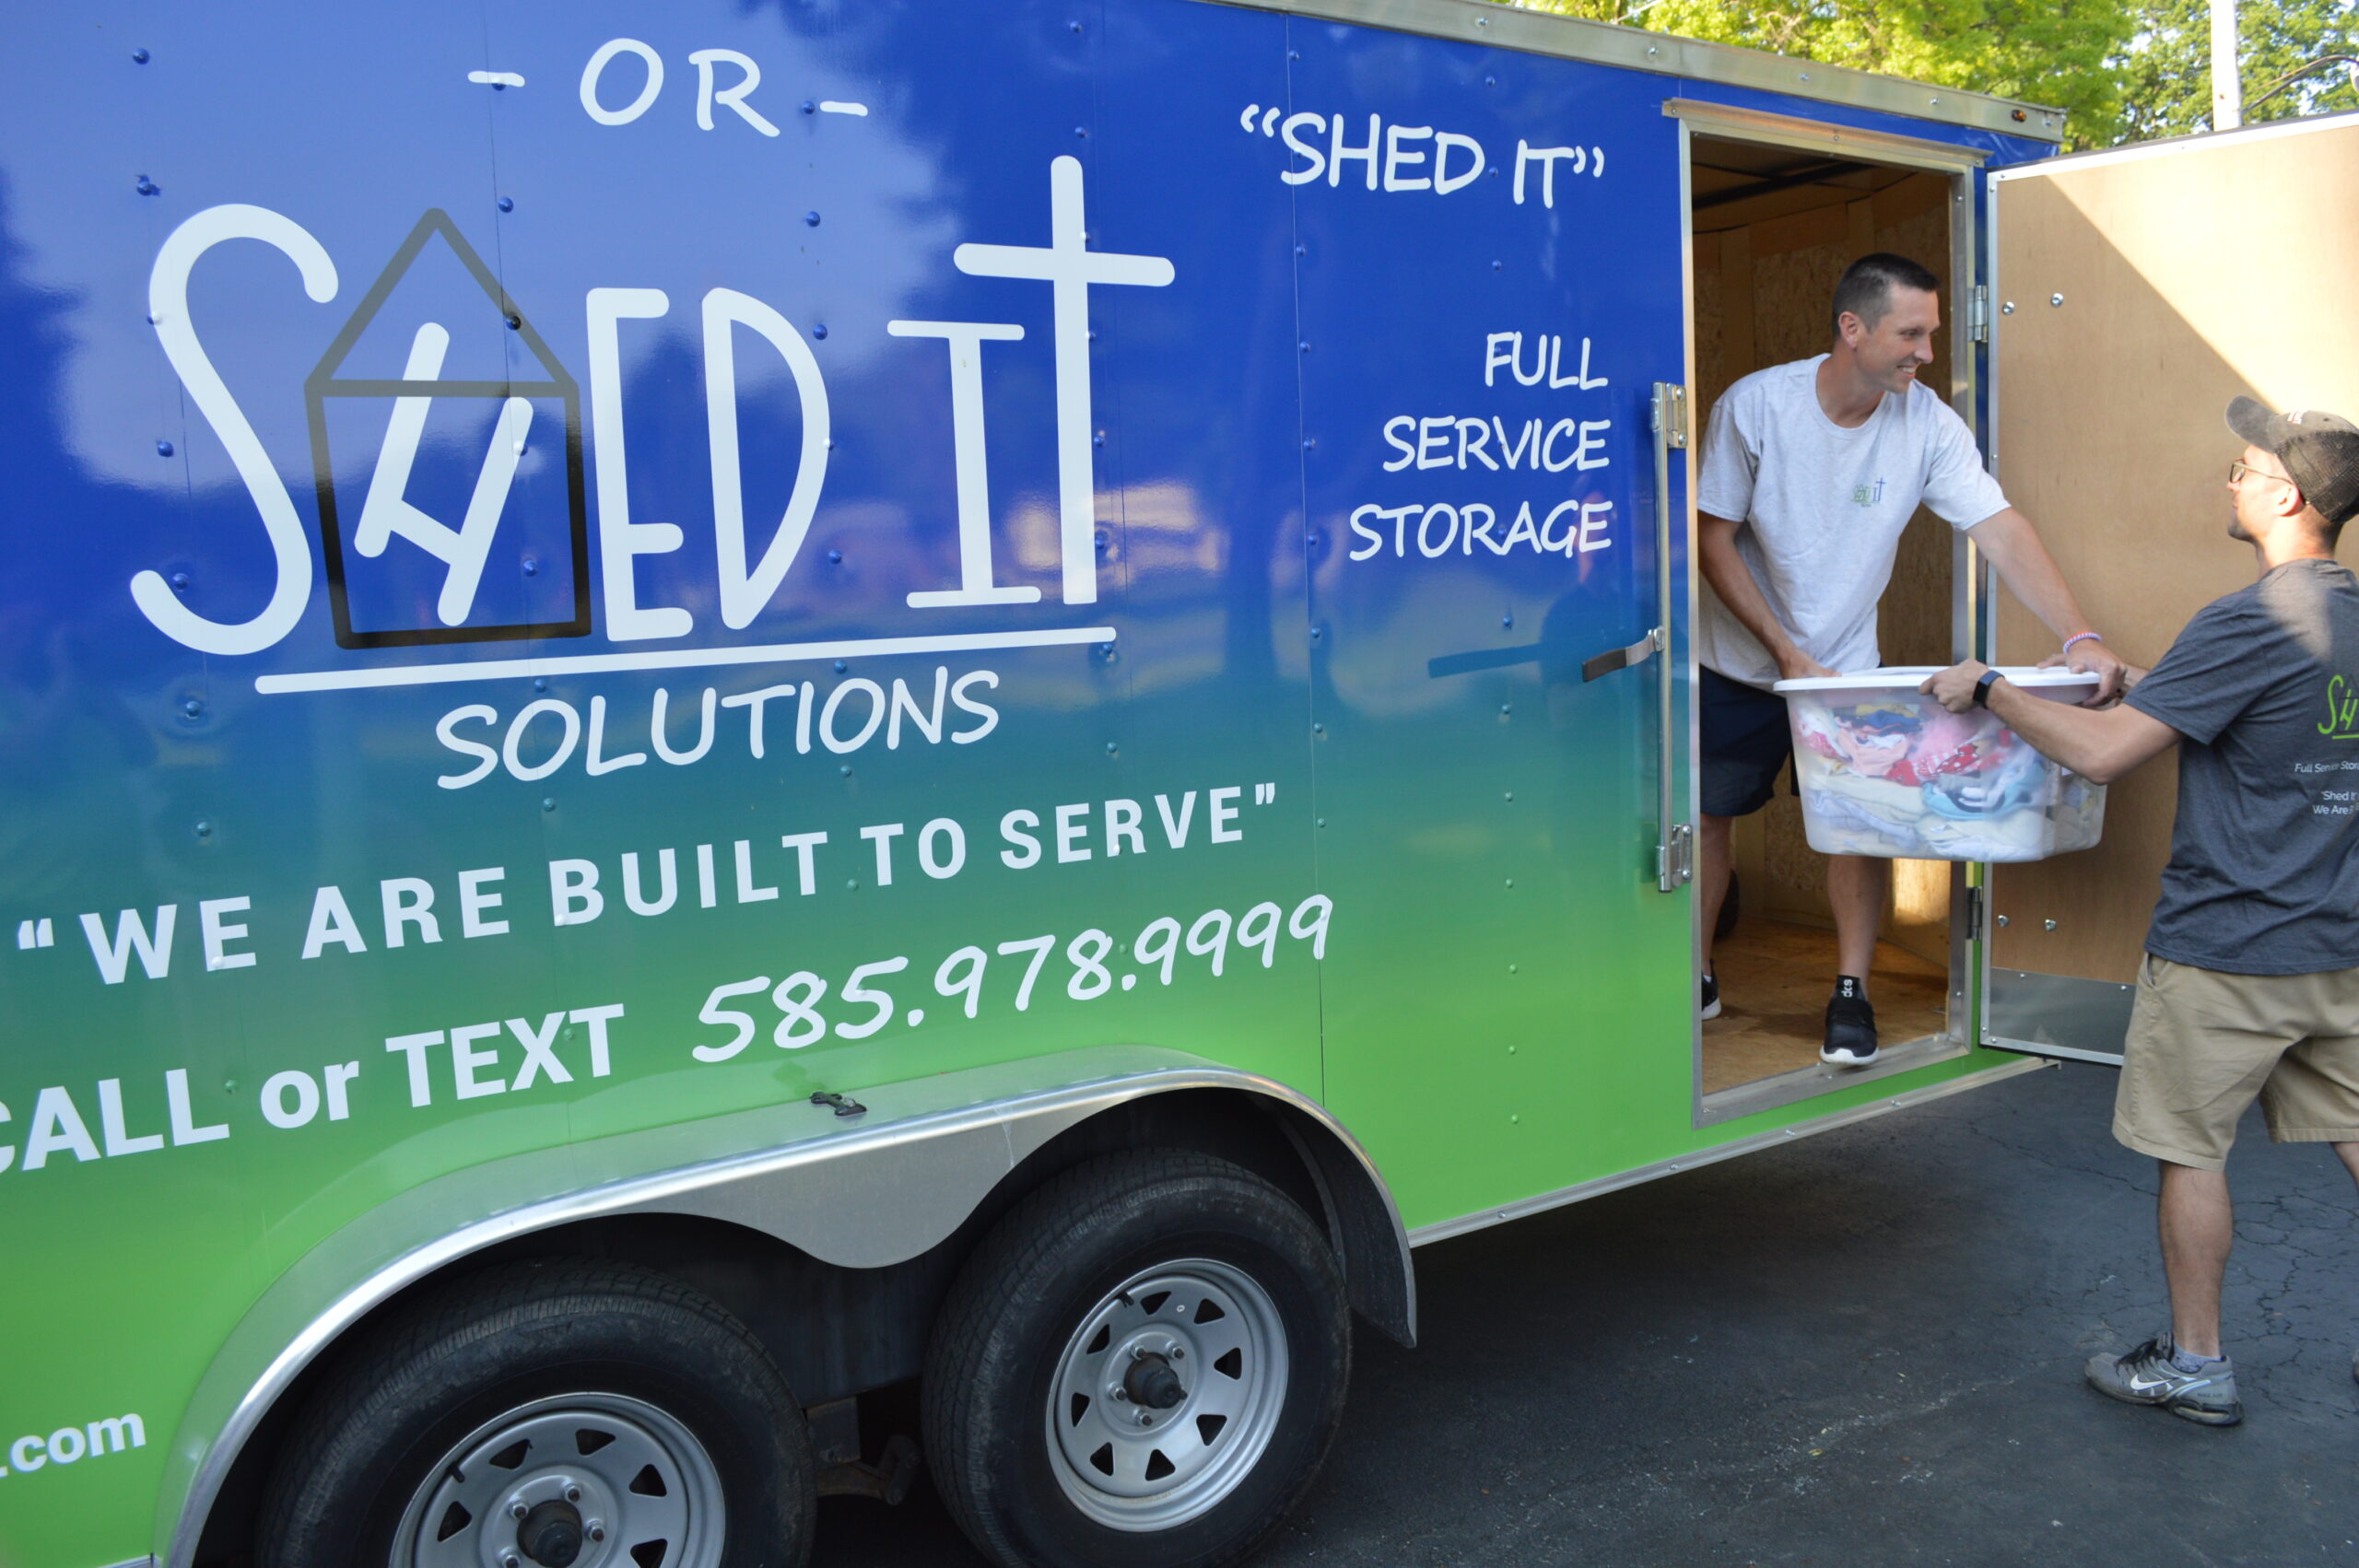 About  Shed It Solutions